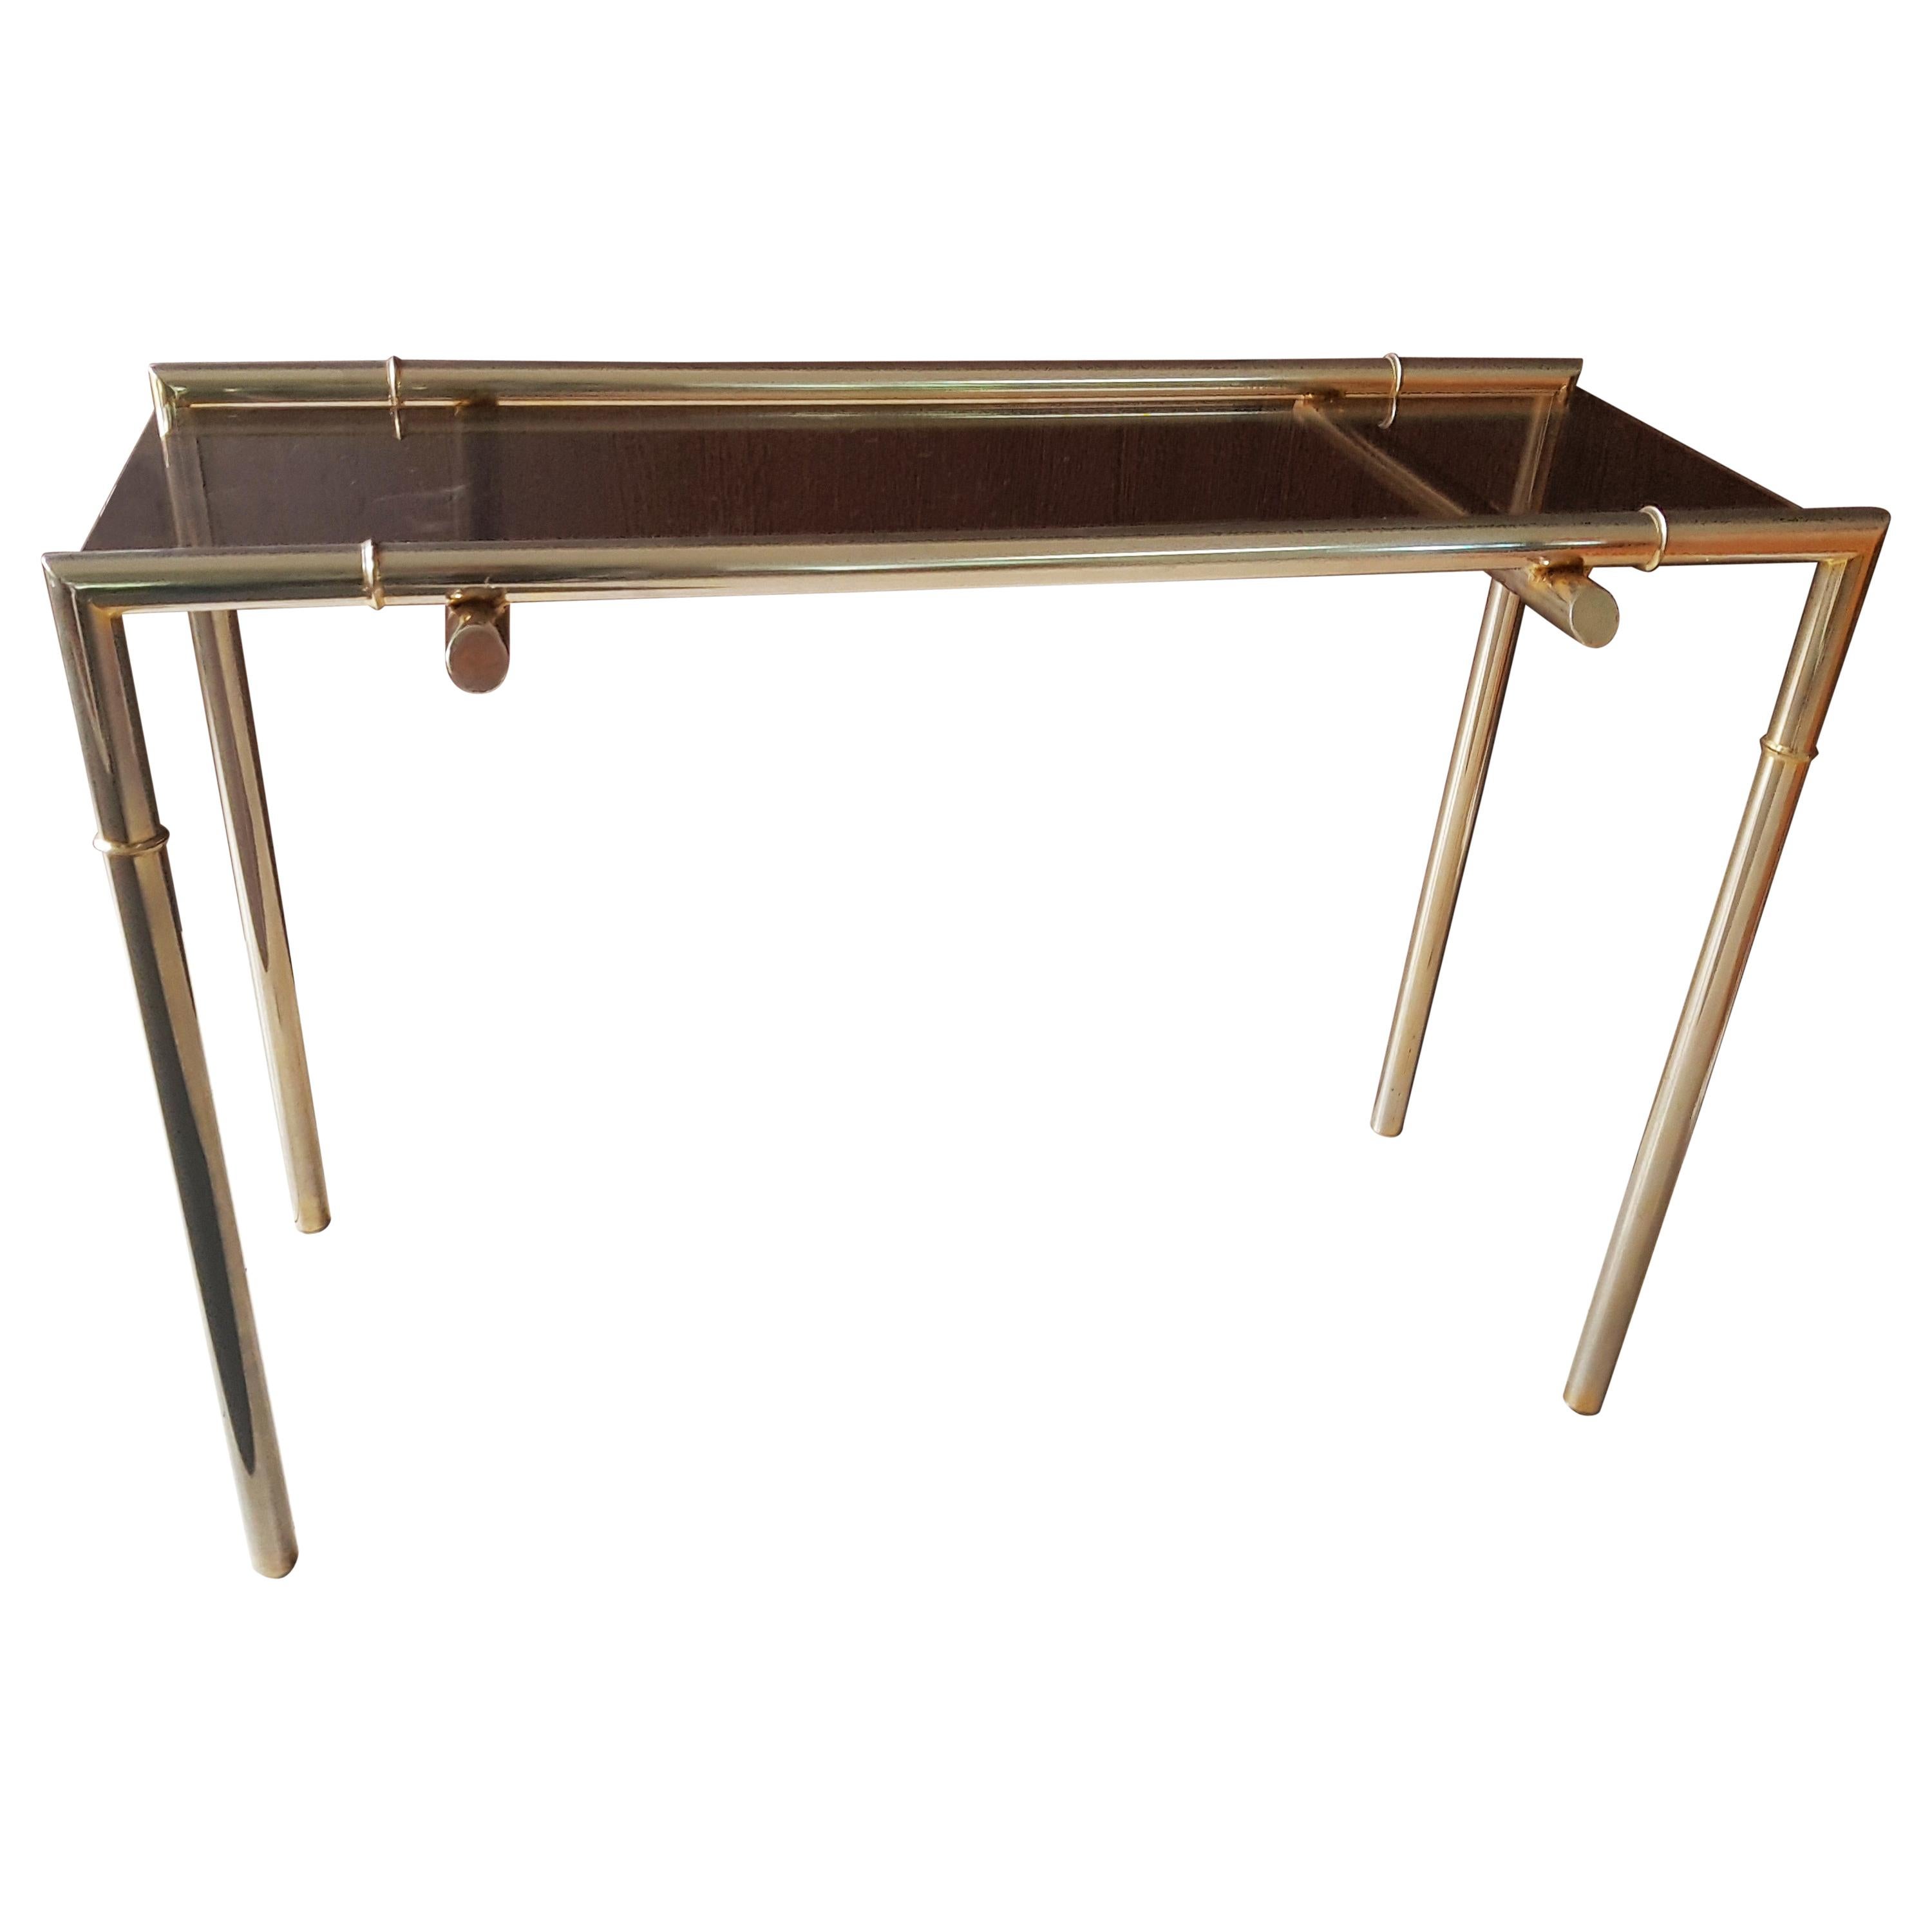 12cm Thick Glass Glass Tables Online Smoked Glass Console Table Small 80cm length x 30cm width x 80cm height